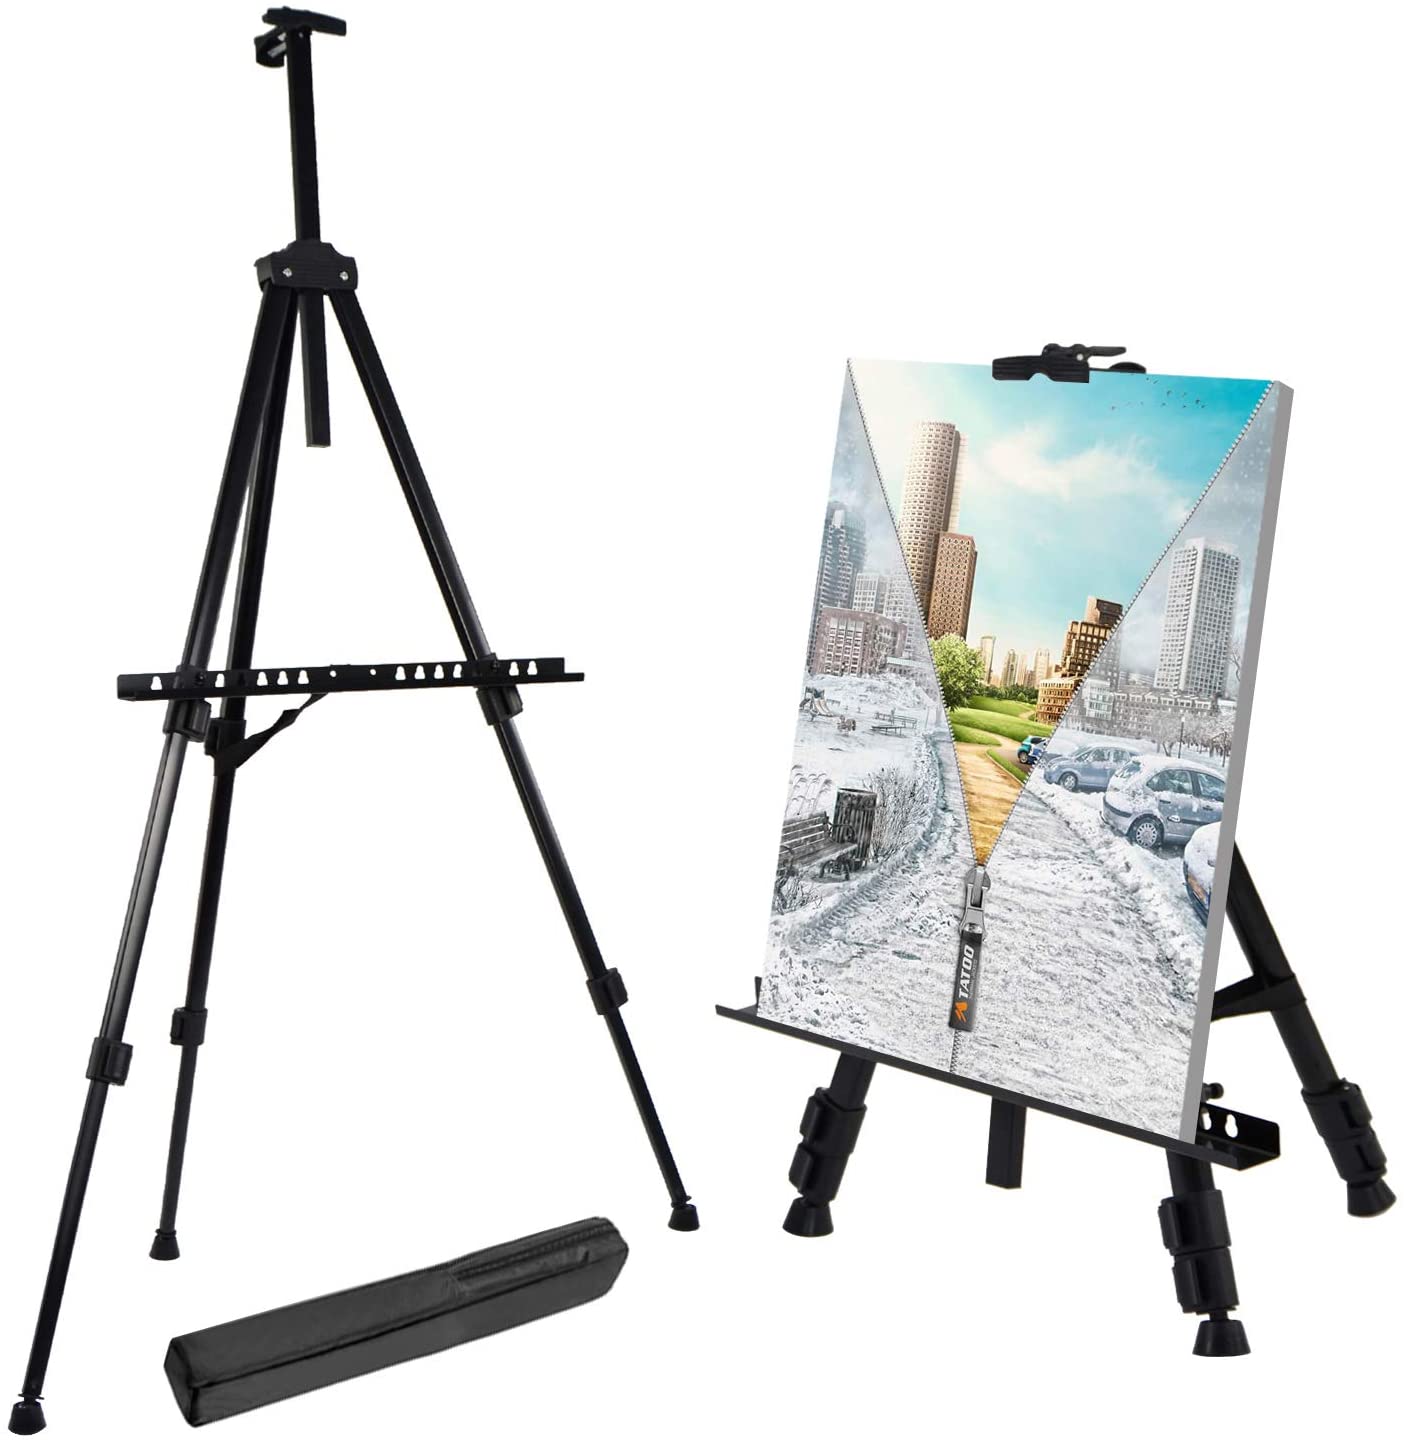 T-Sign 66 Reinforced Artist Easel Stand Extra Thick Aluminum Metal Tripod Display Easel 21 to 66 Adjustable Height with Portable